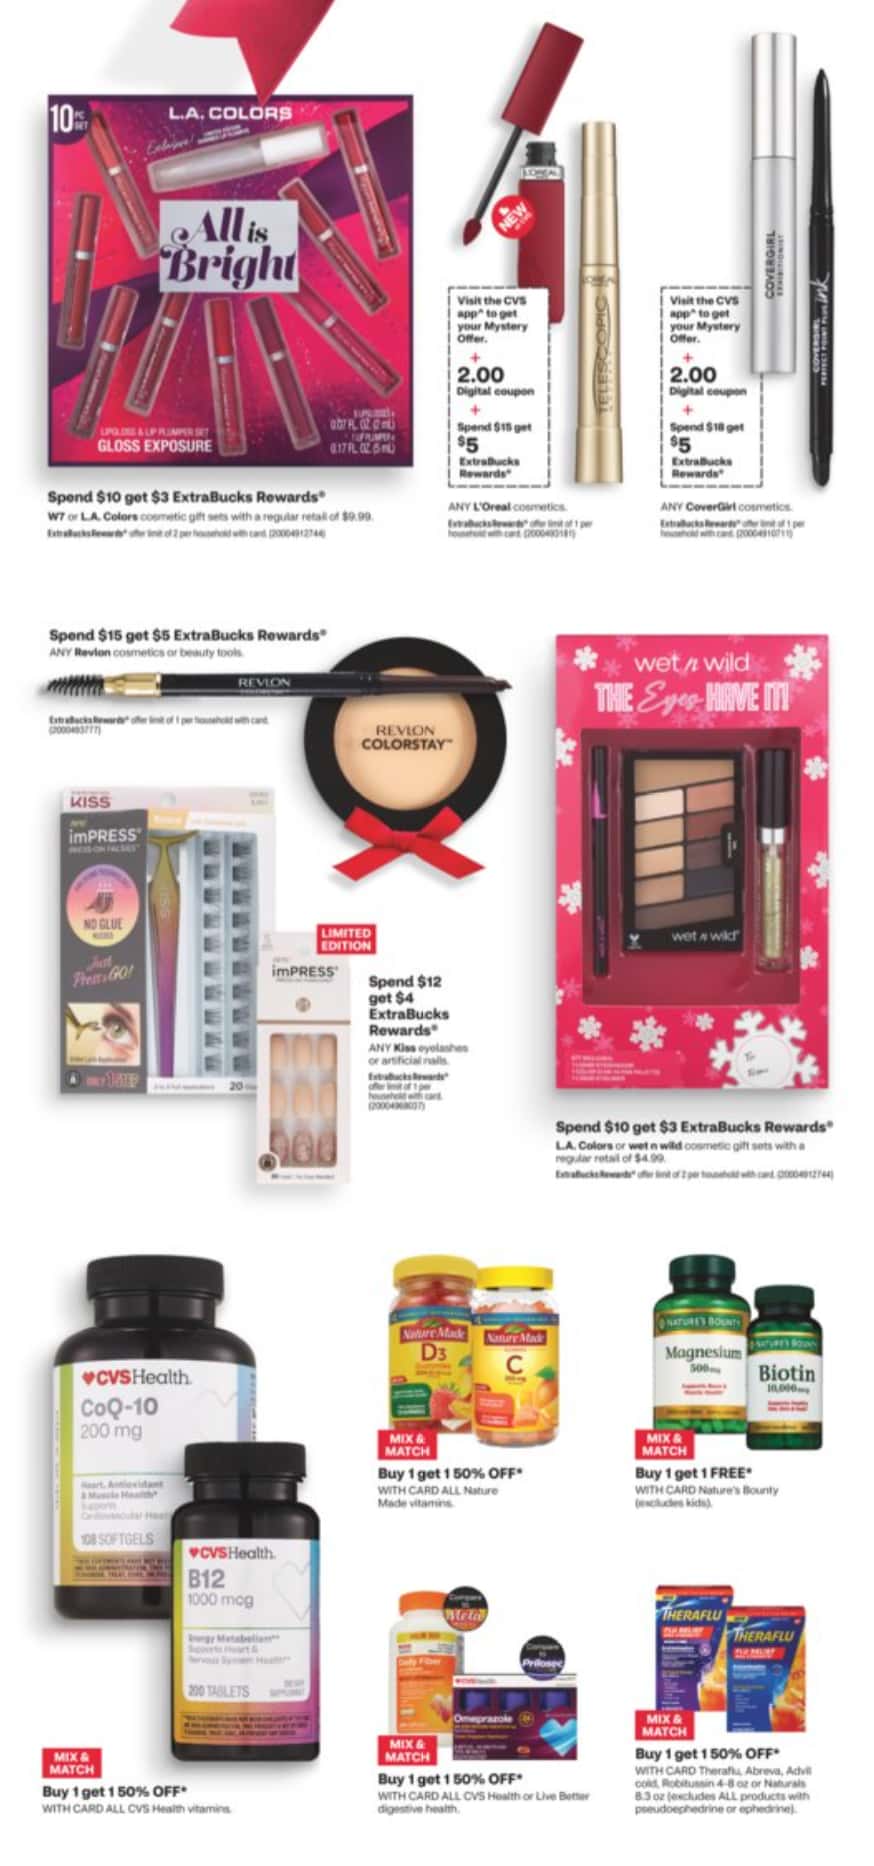 CVS Weekly Ad Preview for December 3 - 9, 2023